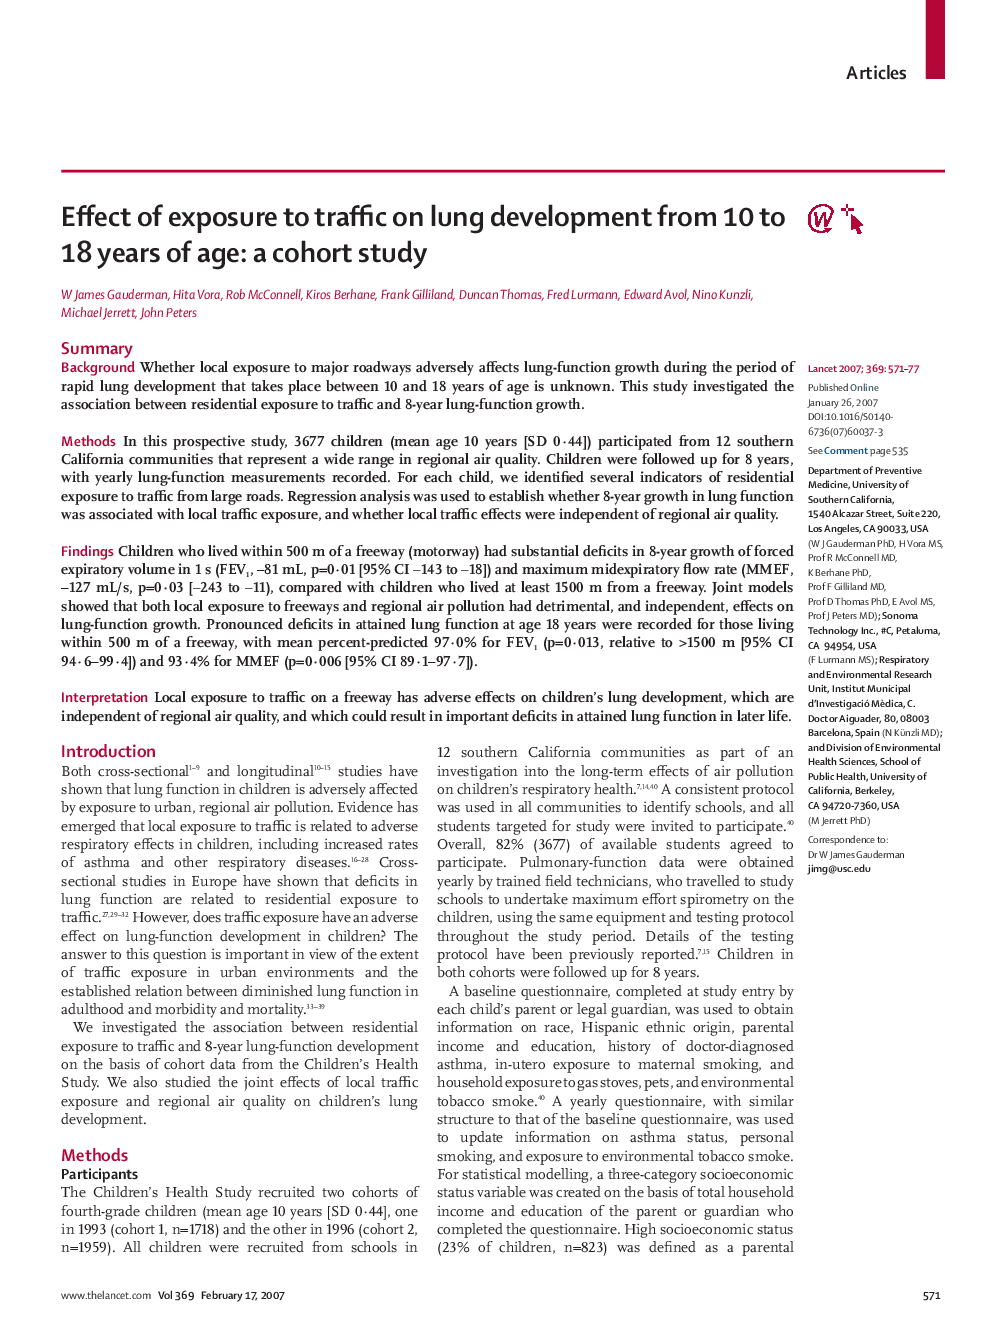 Effect of exposure to traffic on lung development from 10 to 18 years of age: a cohort study